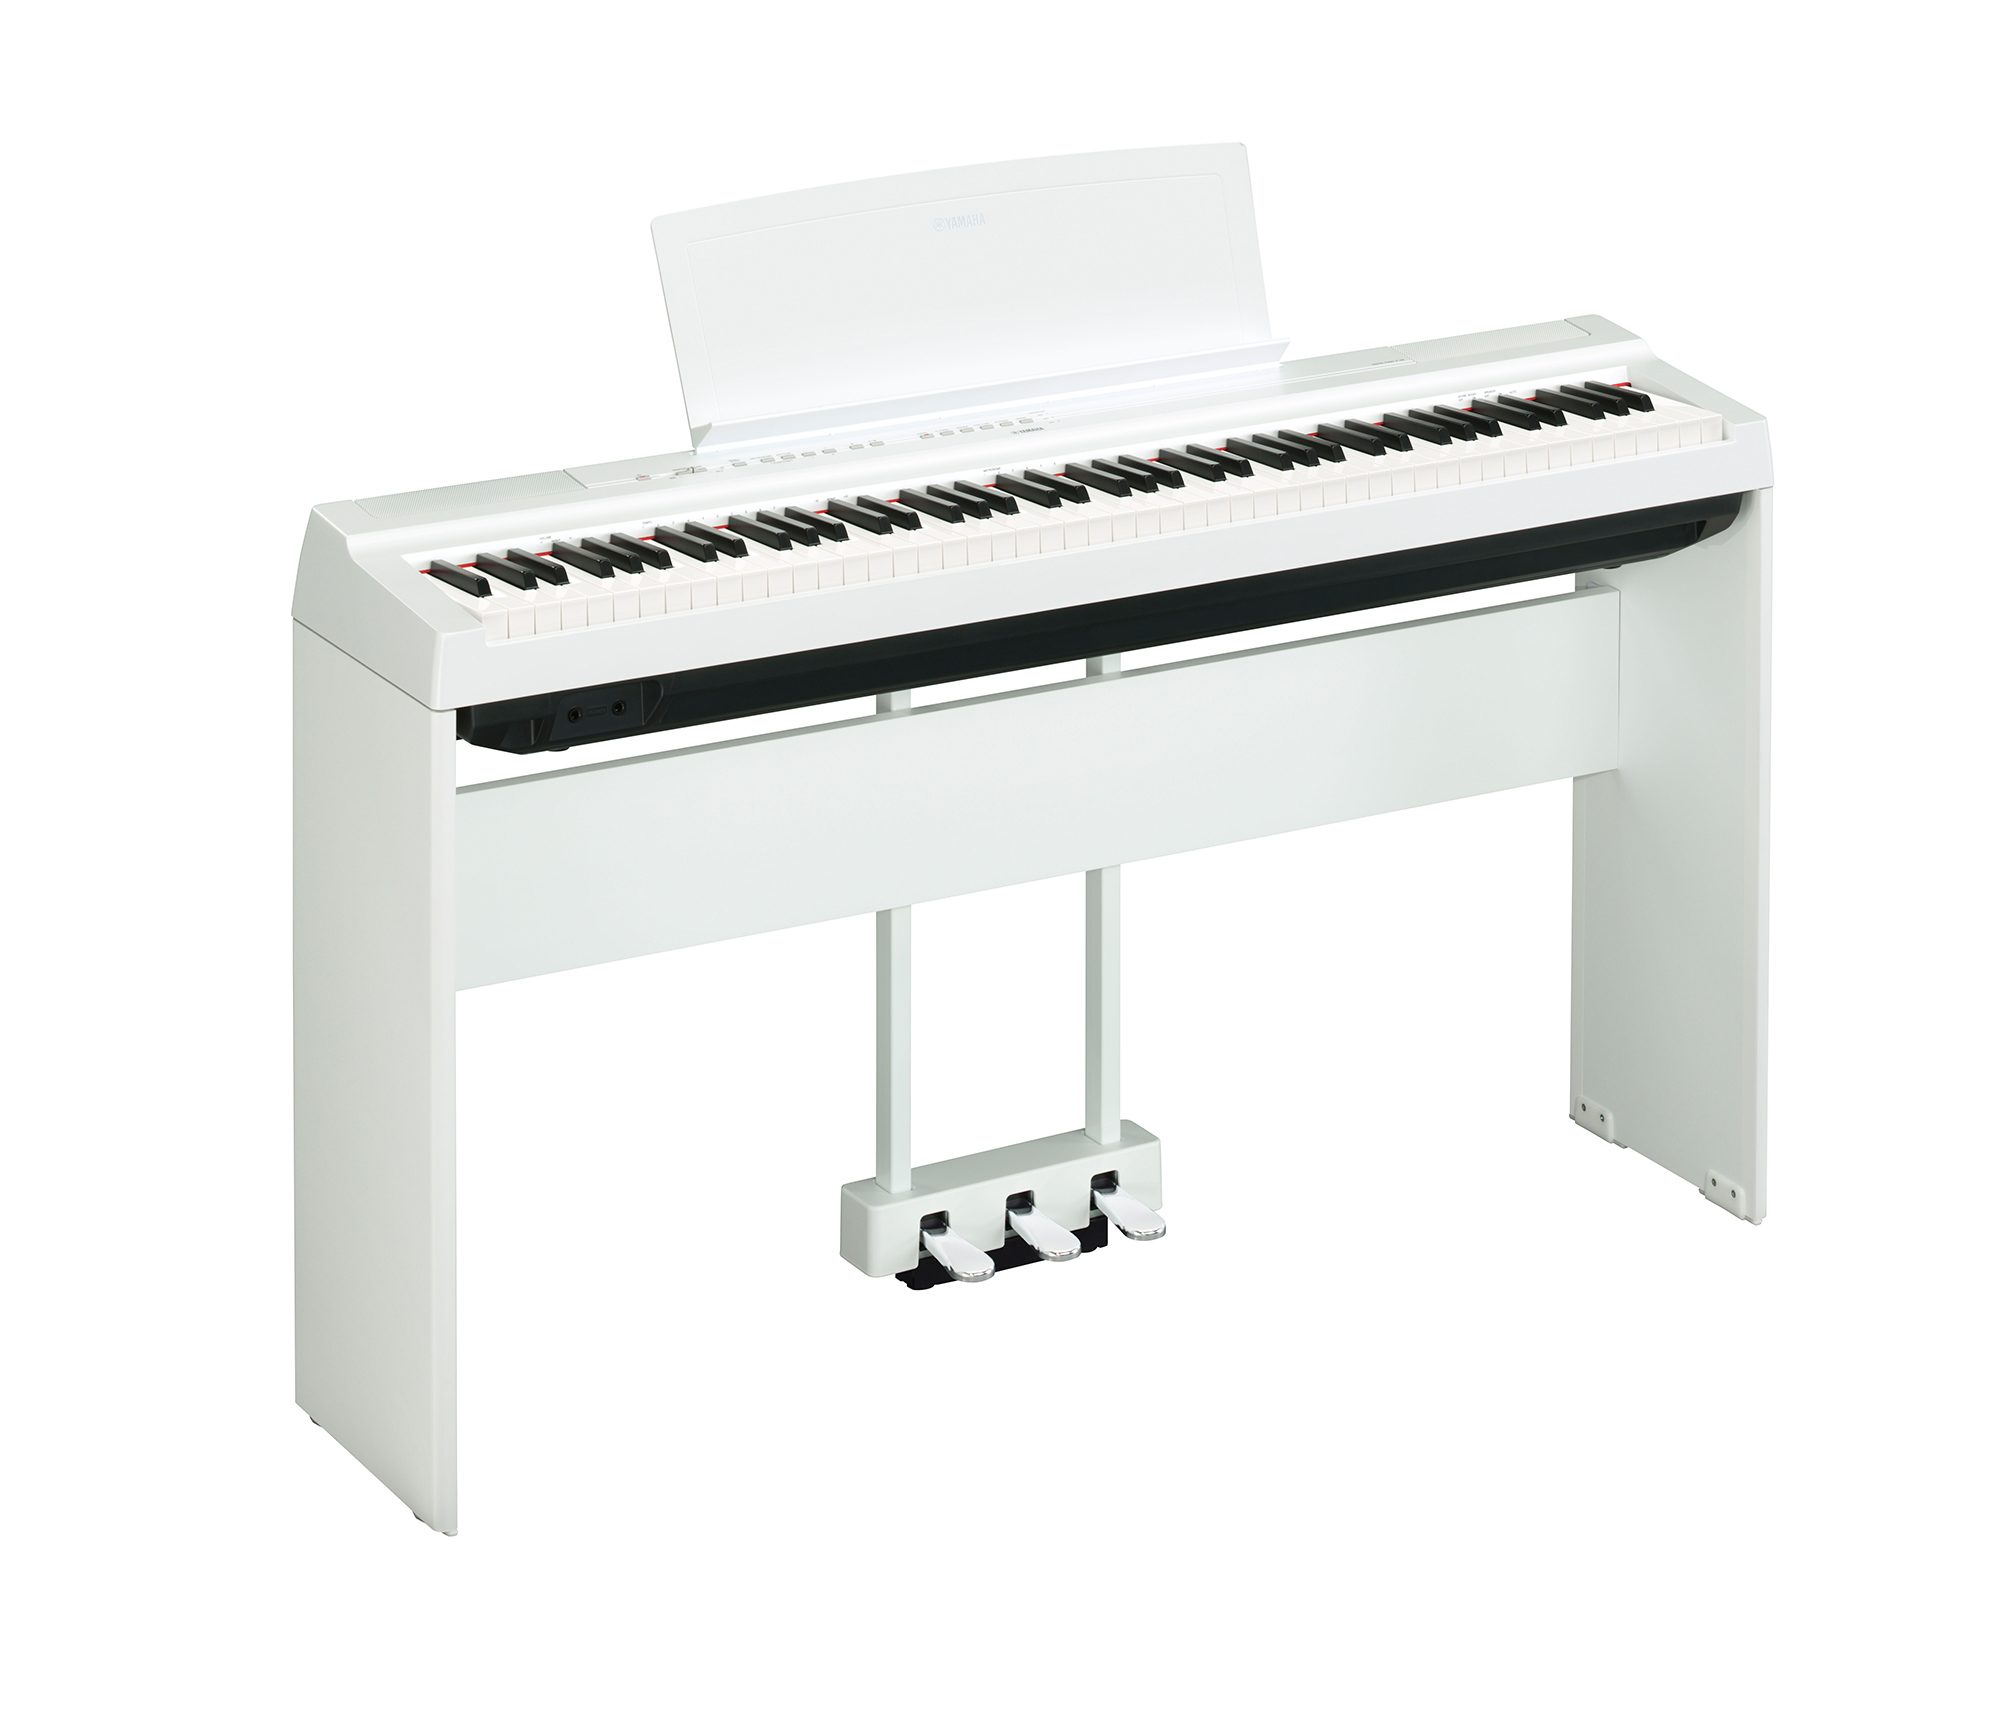 P-125 - Overview - P Series - Pianos - Musical Instruments 